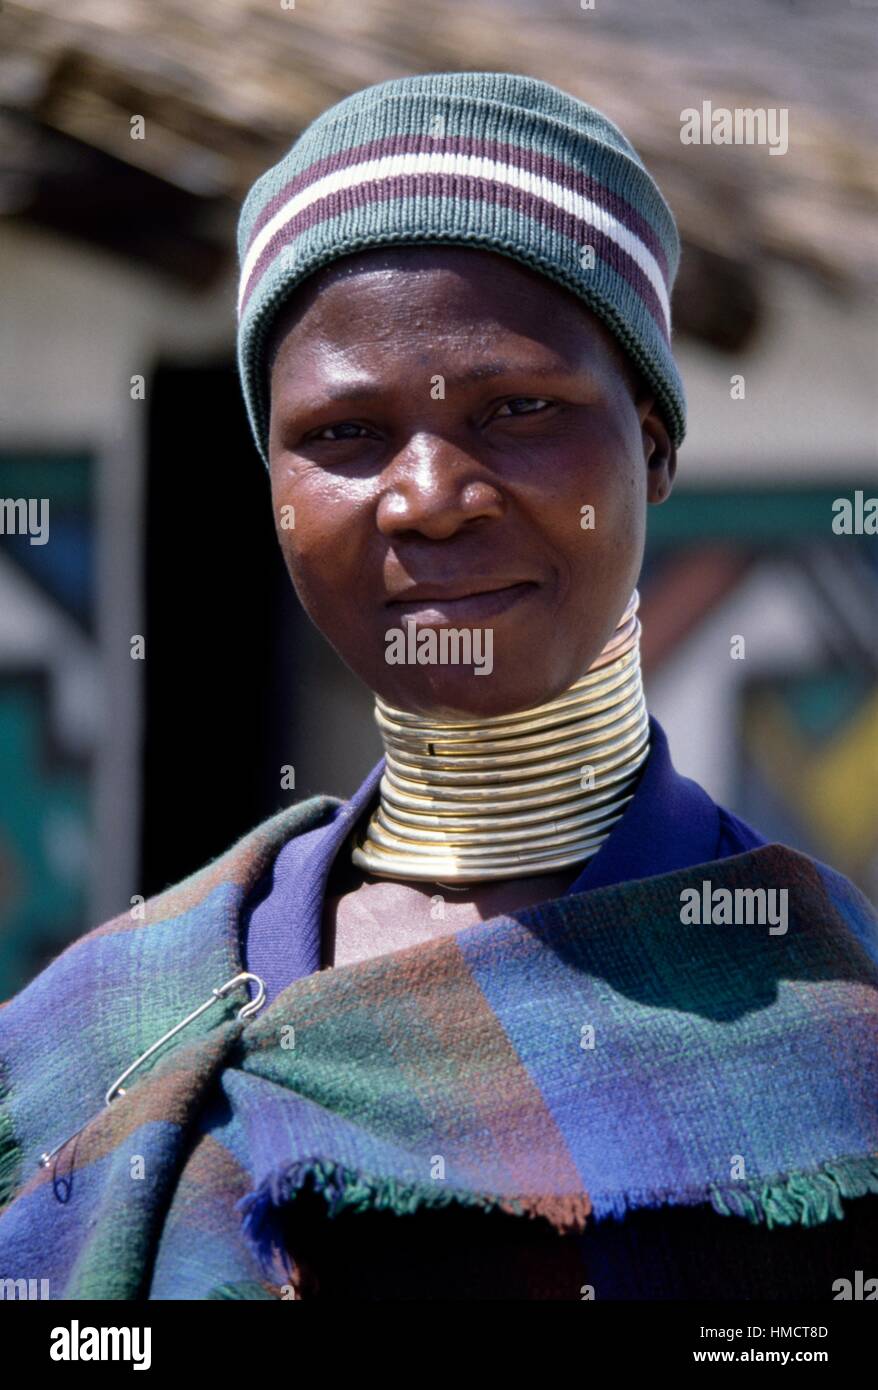 Ndebele woman wearing idzilla, bronze or copper neck rings, South Africa  Stock Photo - Alamy